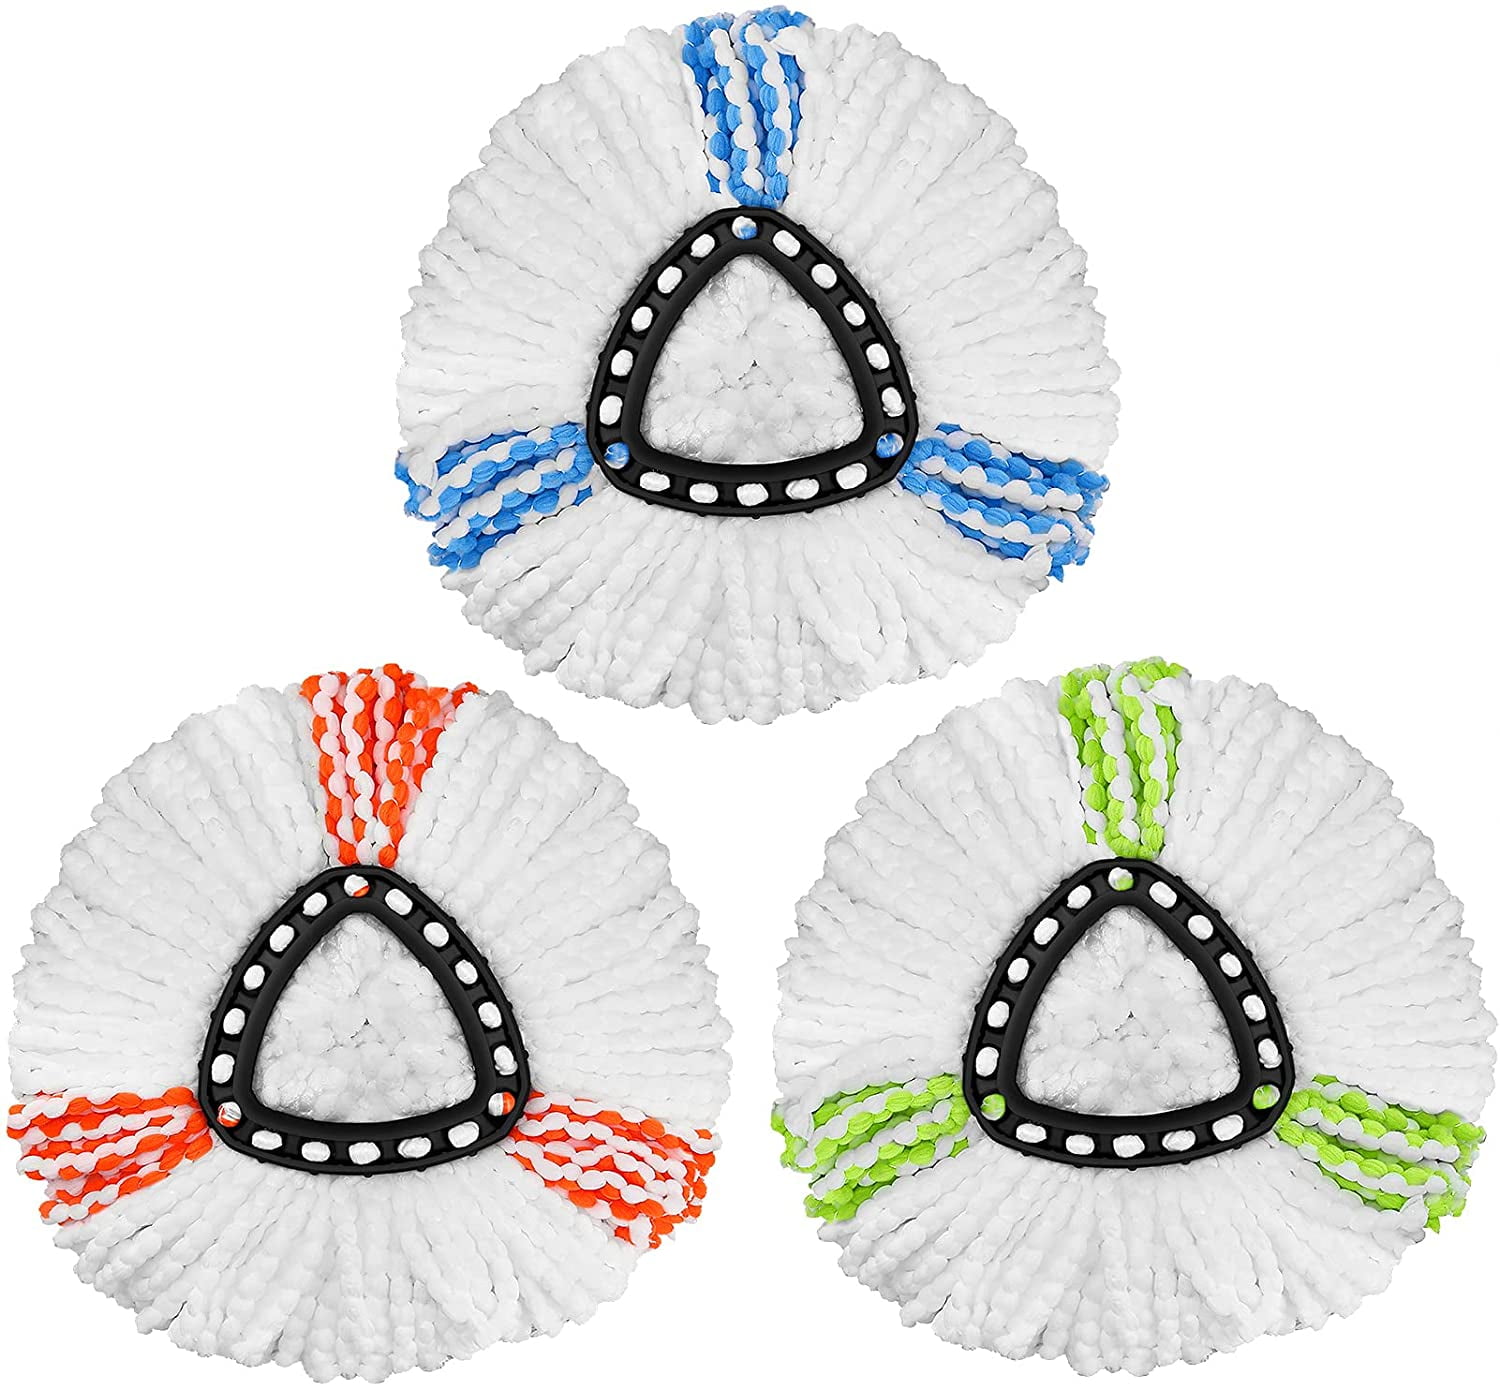 4 Pack Spin Mop Replacement Heads Microfiber Spin Mop Refills Easy Cleaning Mop Head